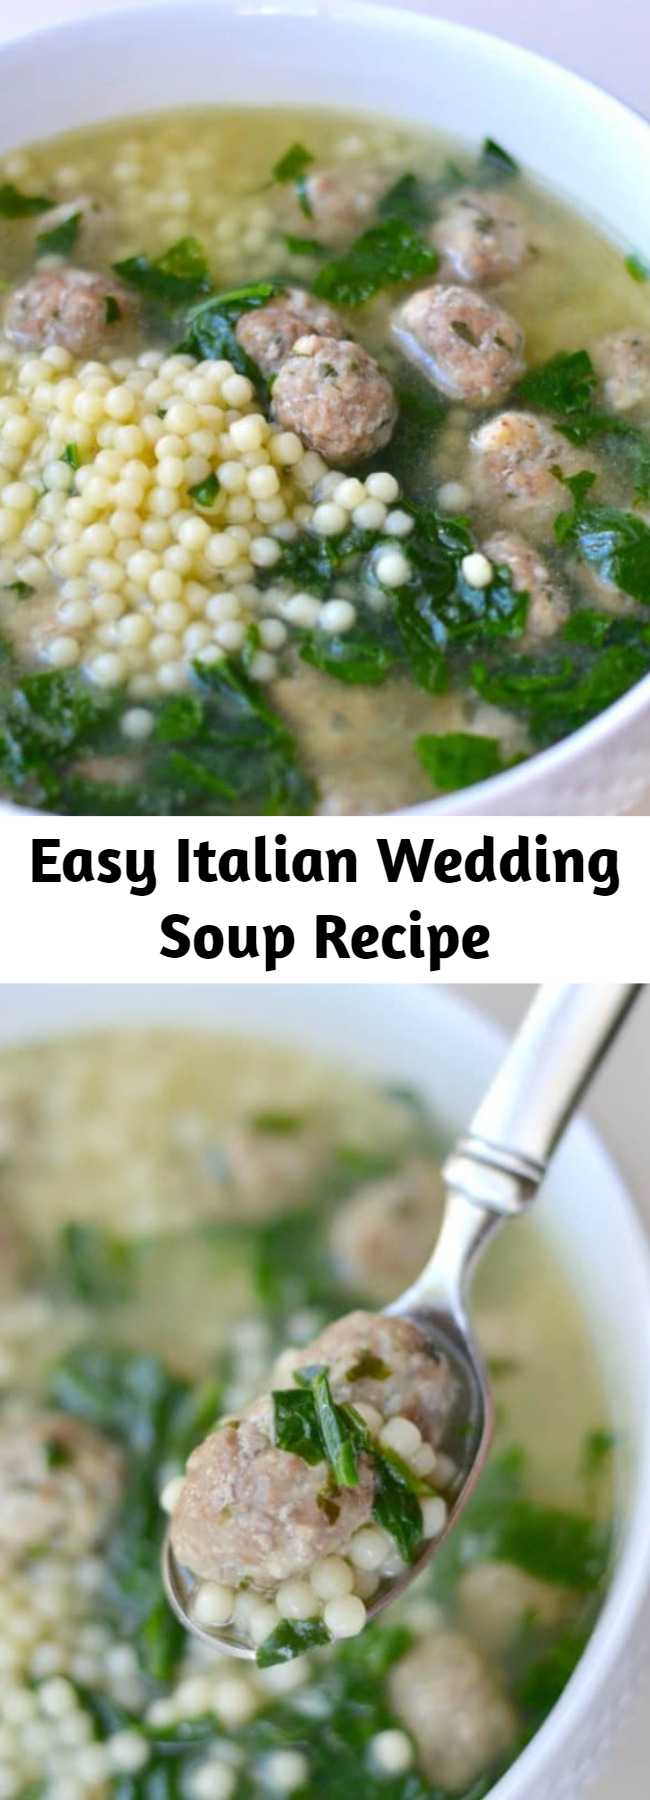 Easy Italian Wedding Soup Recipe - A delicious Italian Wedding soup recipe containing pasta, mini meatballs, spinach, and a flavorful broth.This Italian wedding soup recipe is simple to make and the absolute BEST thing to eat! My whole family loves it, and yours will, too.